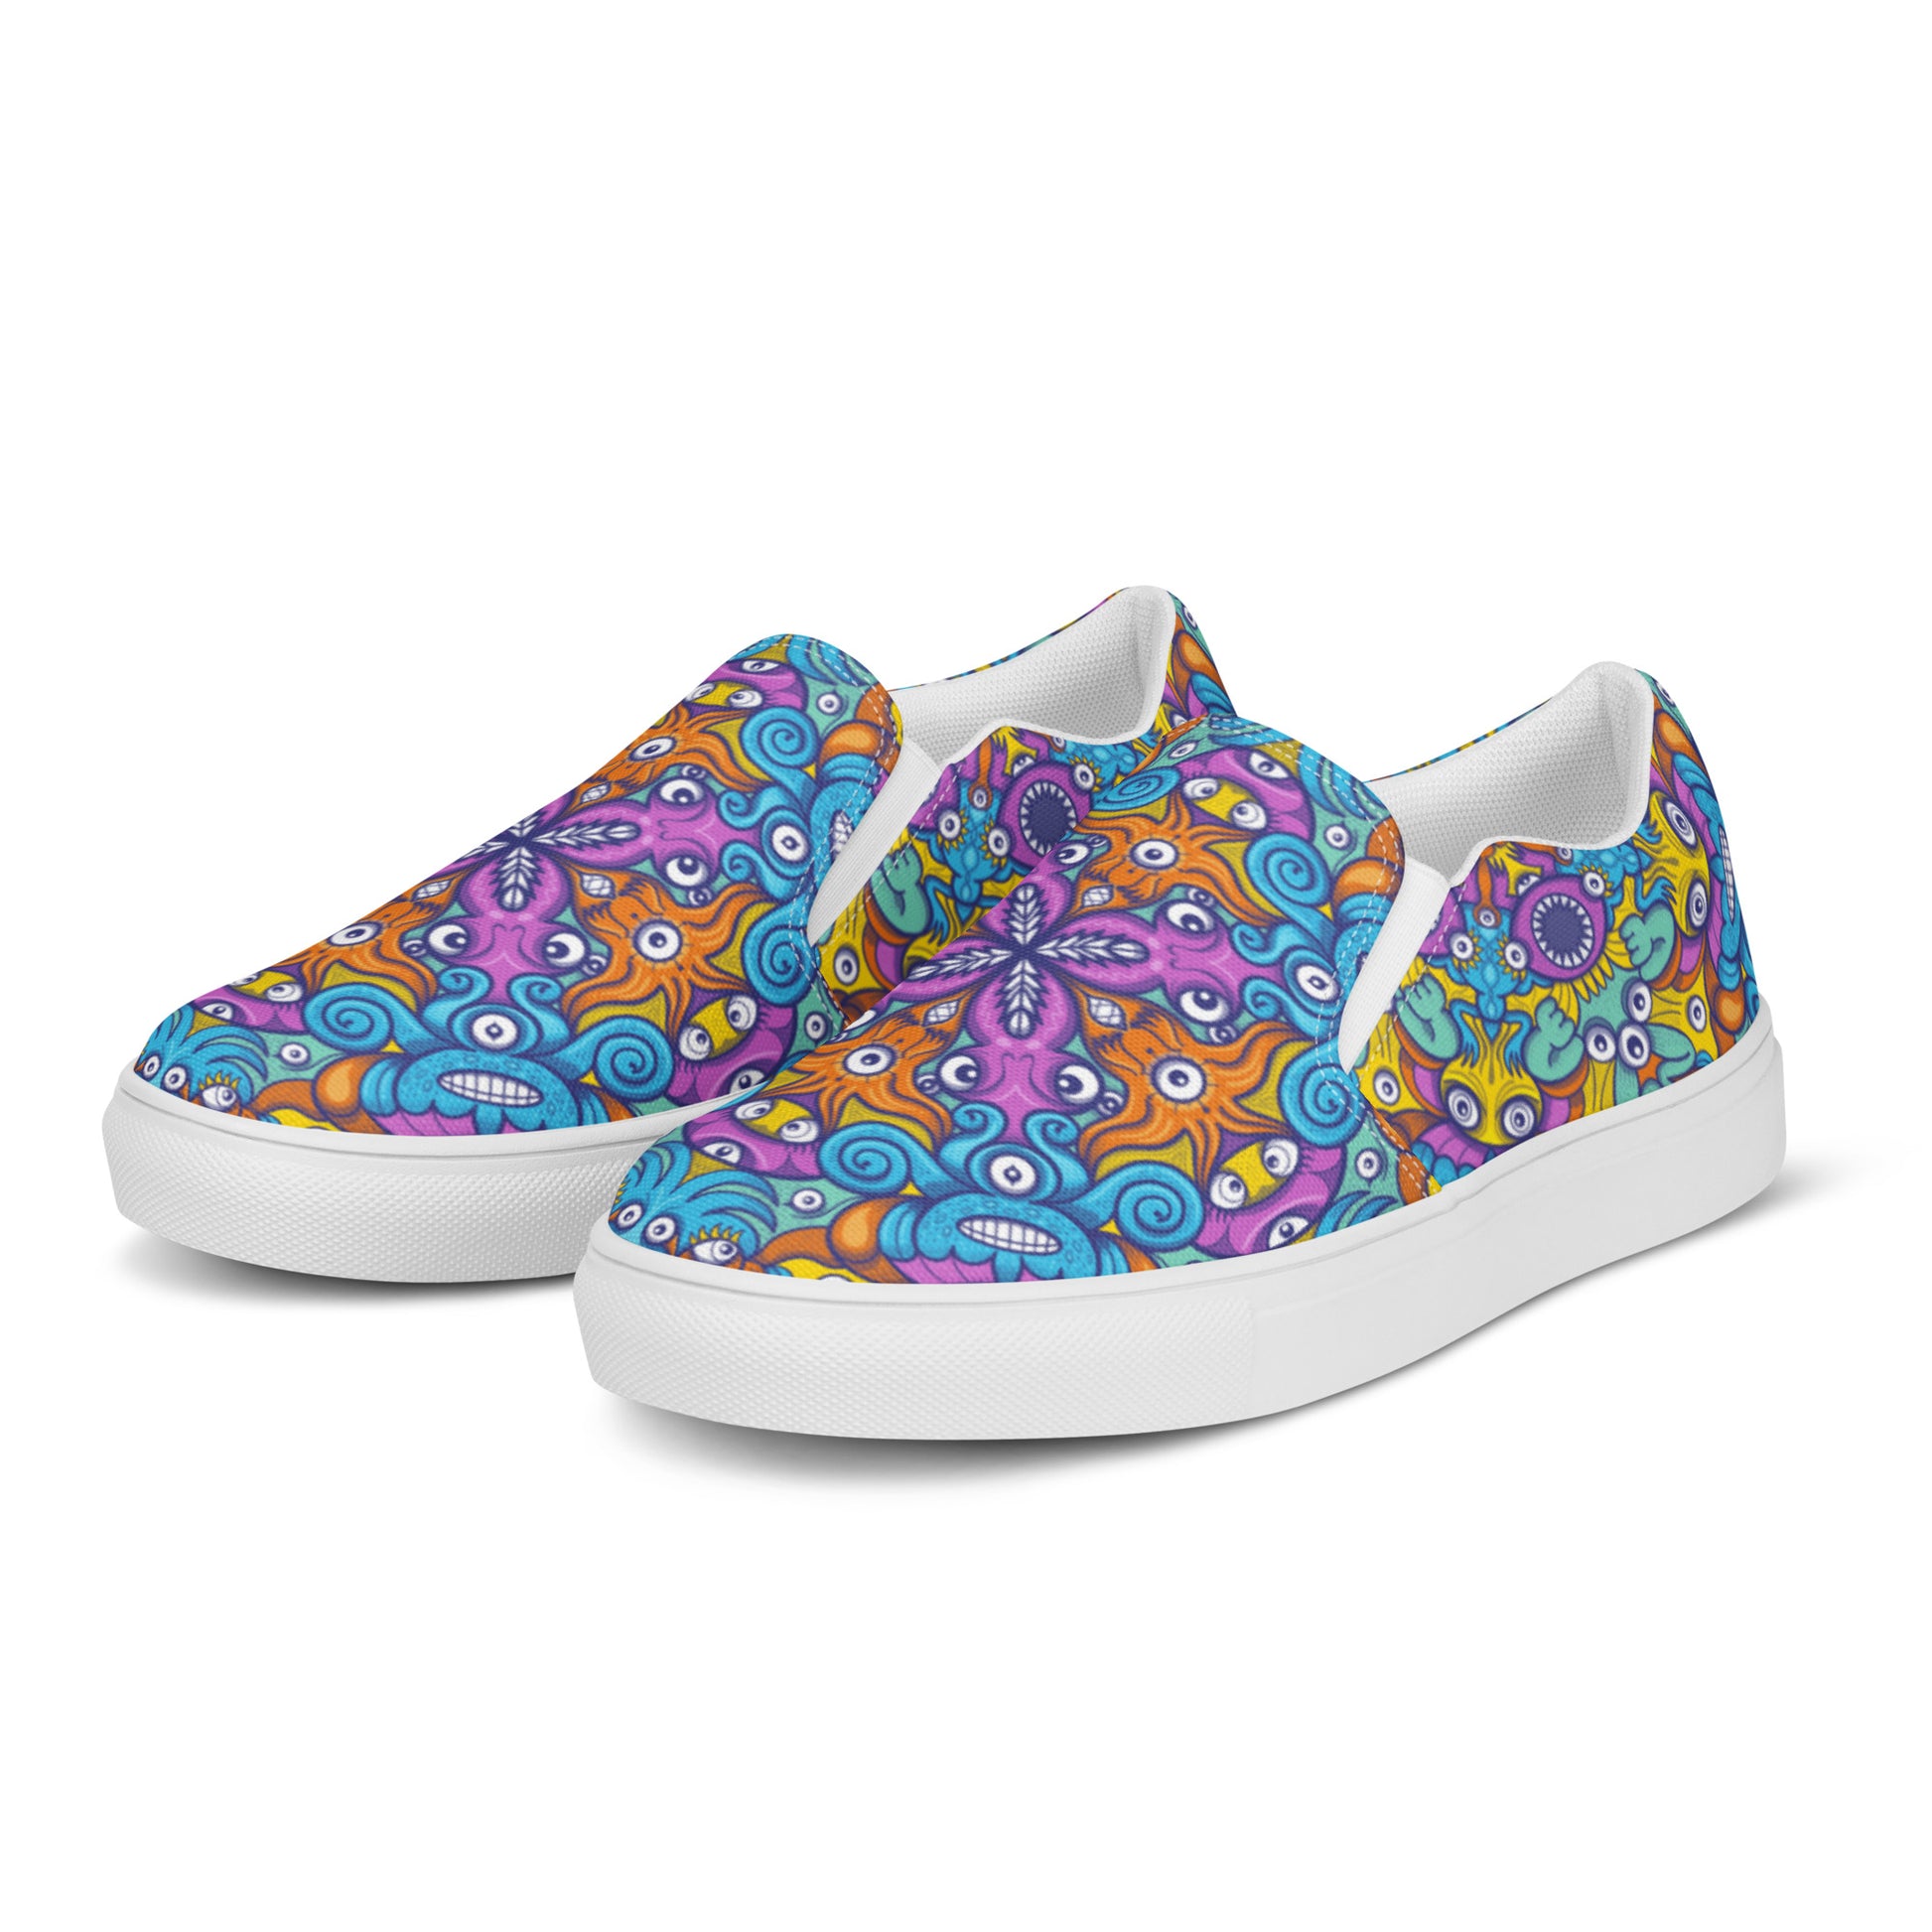 The ultimate sea beasts cast from the deep end of the ocean Men’s slip-on canvas shoes. Overview